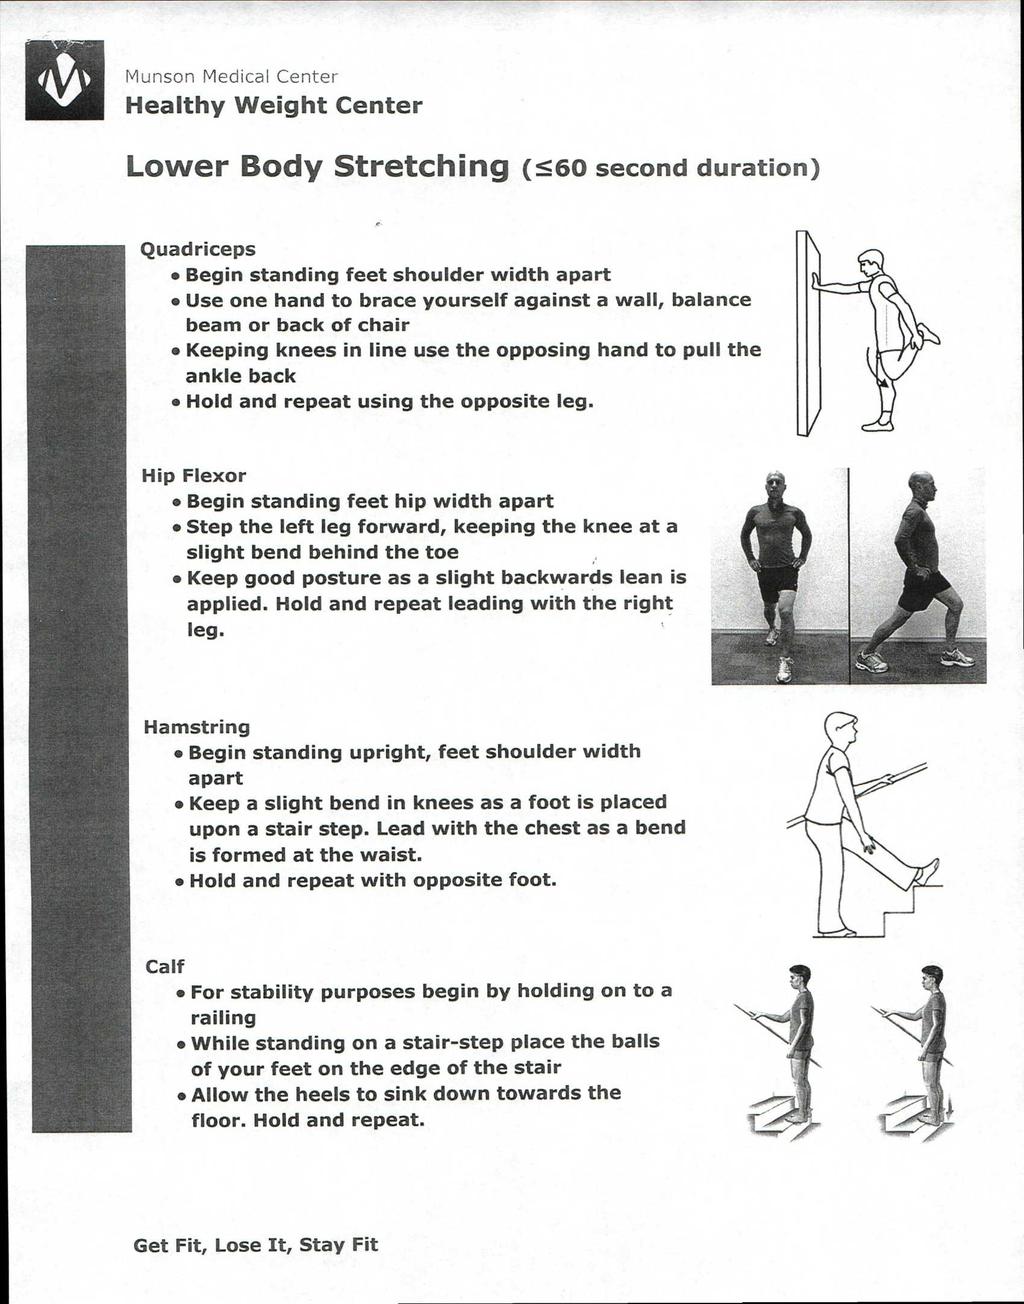 Lower Body Stretching (560 second duration) Quadriceps Begin standing feet shoulder width apart Use one hand to brace yourself against a wall, balance beam or back of chair Keeping knees in line use